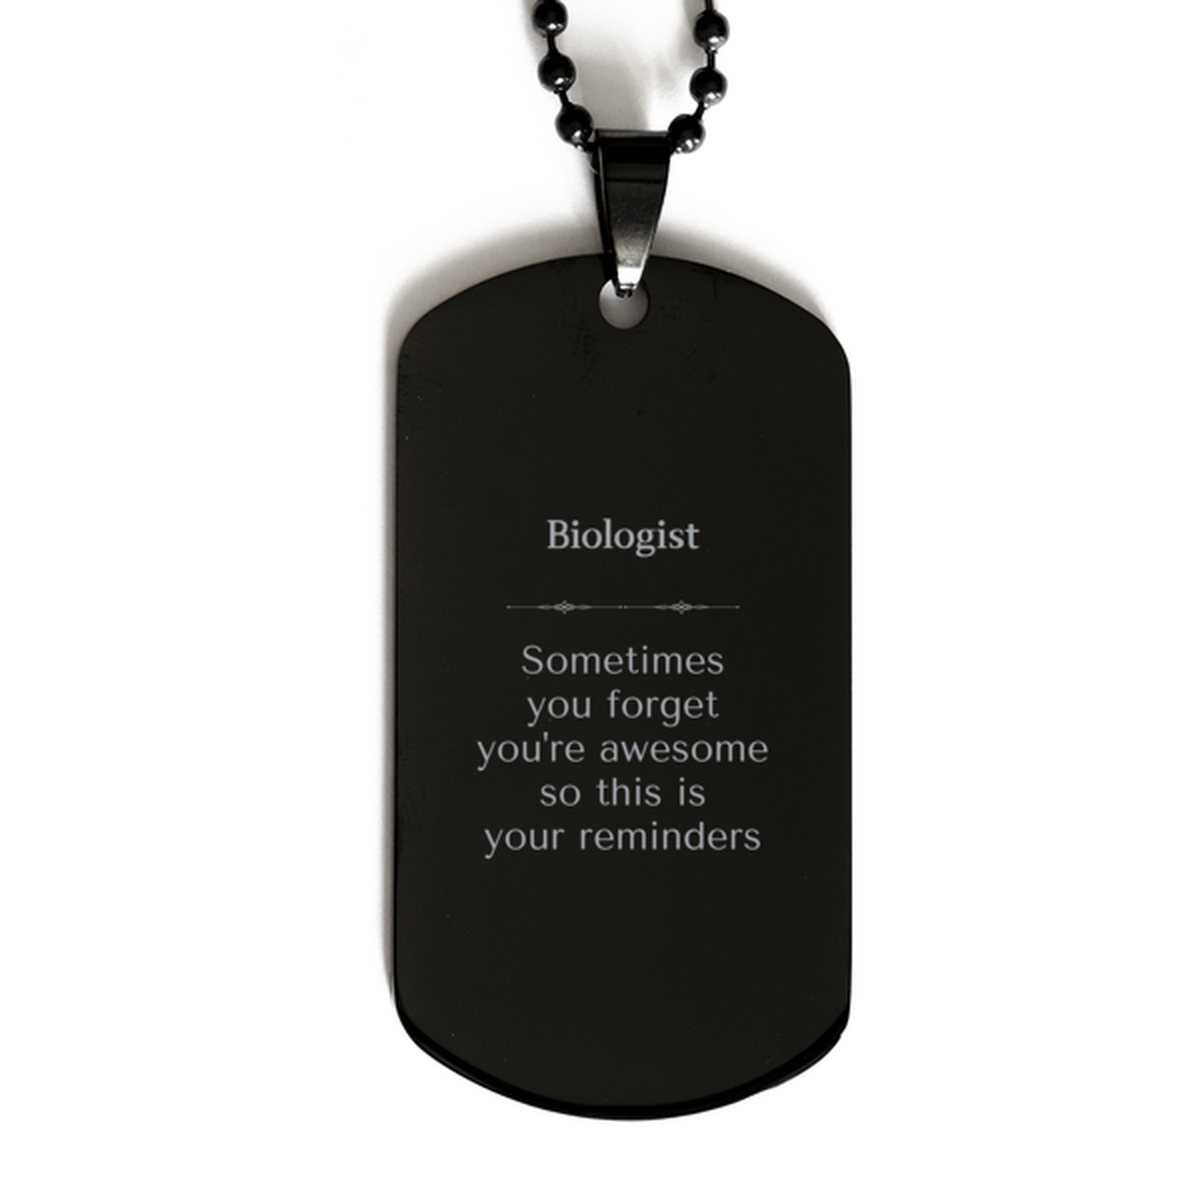 Sentimental Biologist Black Dog Tag, Biologist Sometimes you forget you're awesome so this is your reminders, Graduation Christmas Birthday Gifts for Biologist, Men, Women, Coworkers